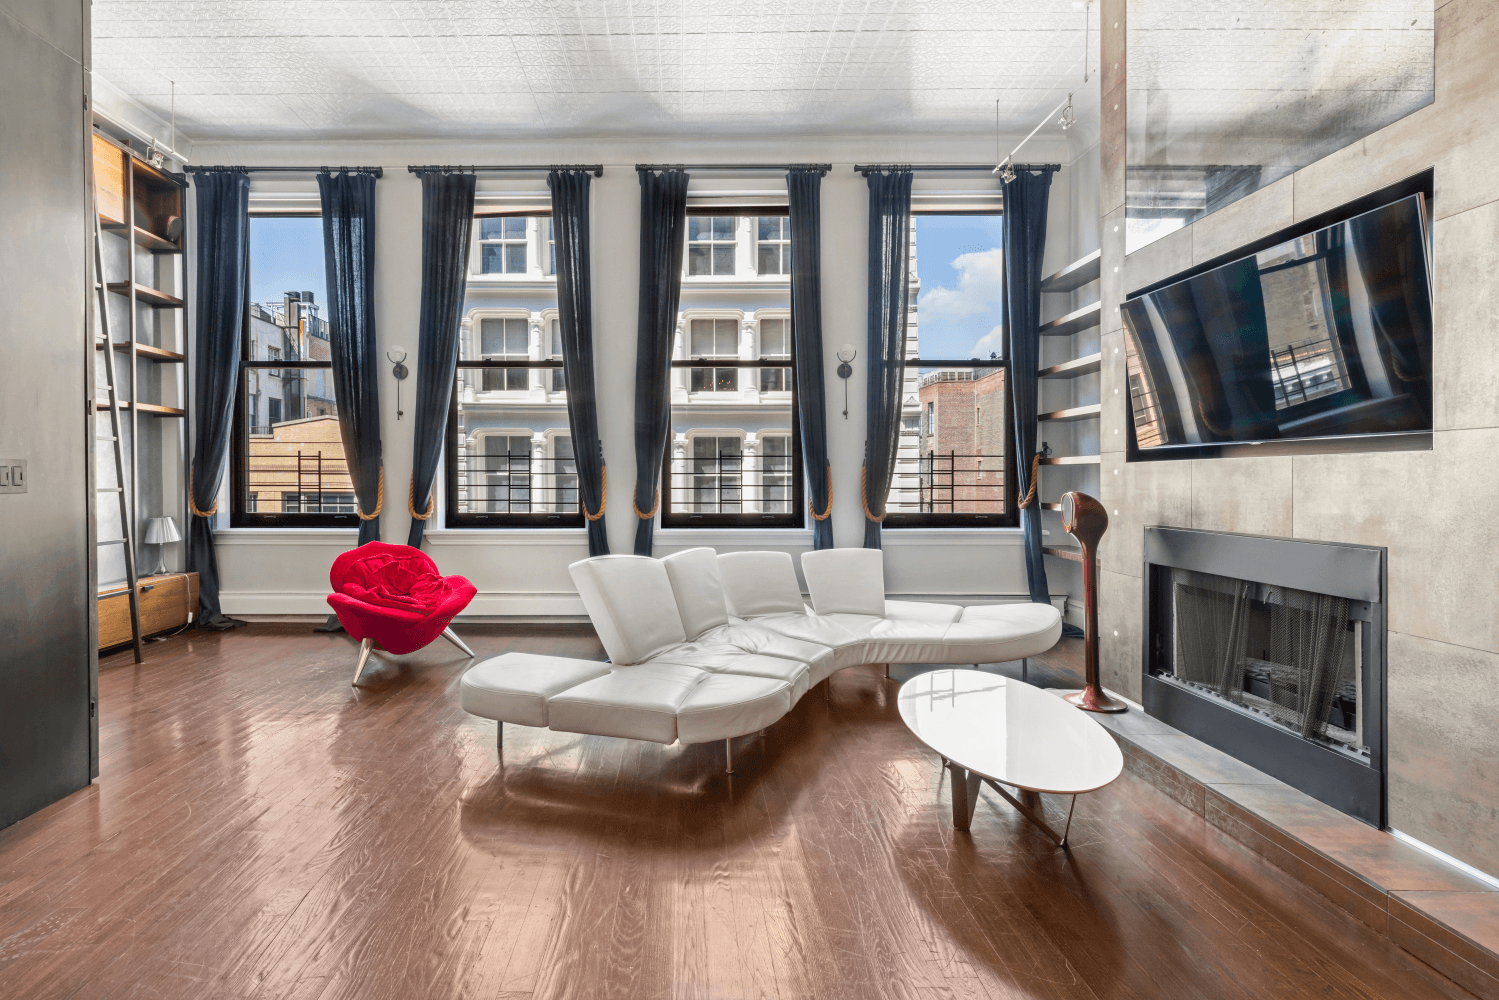 A Radiant SoHo Loft with Abundant Natural Light and 13 Foot Ceilings.